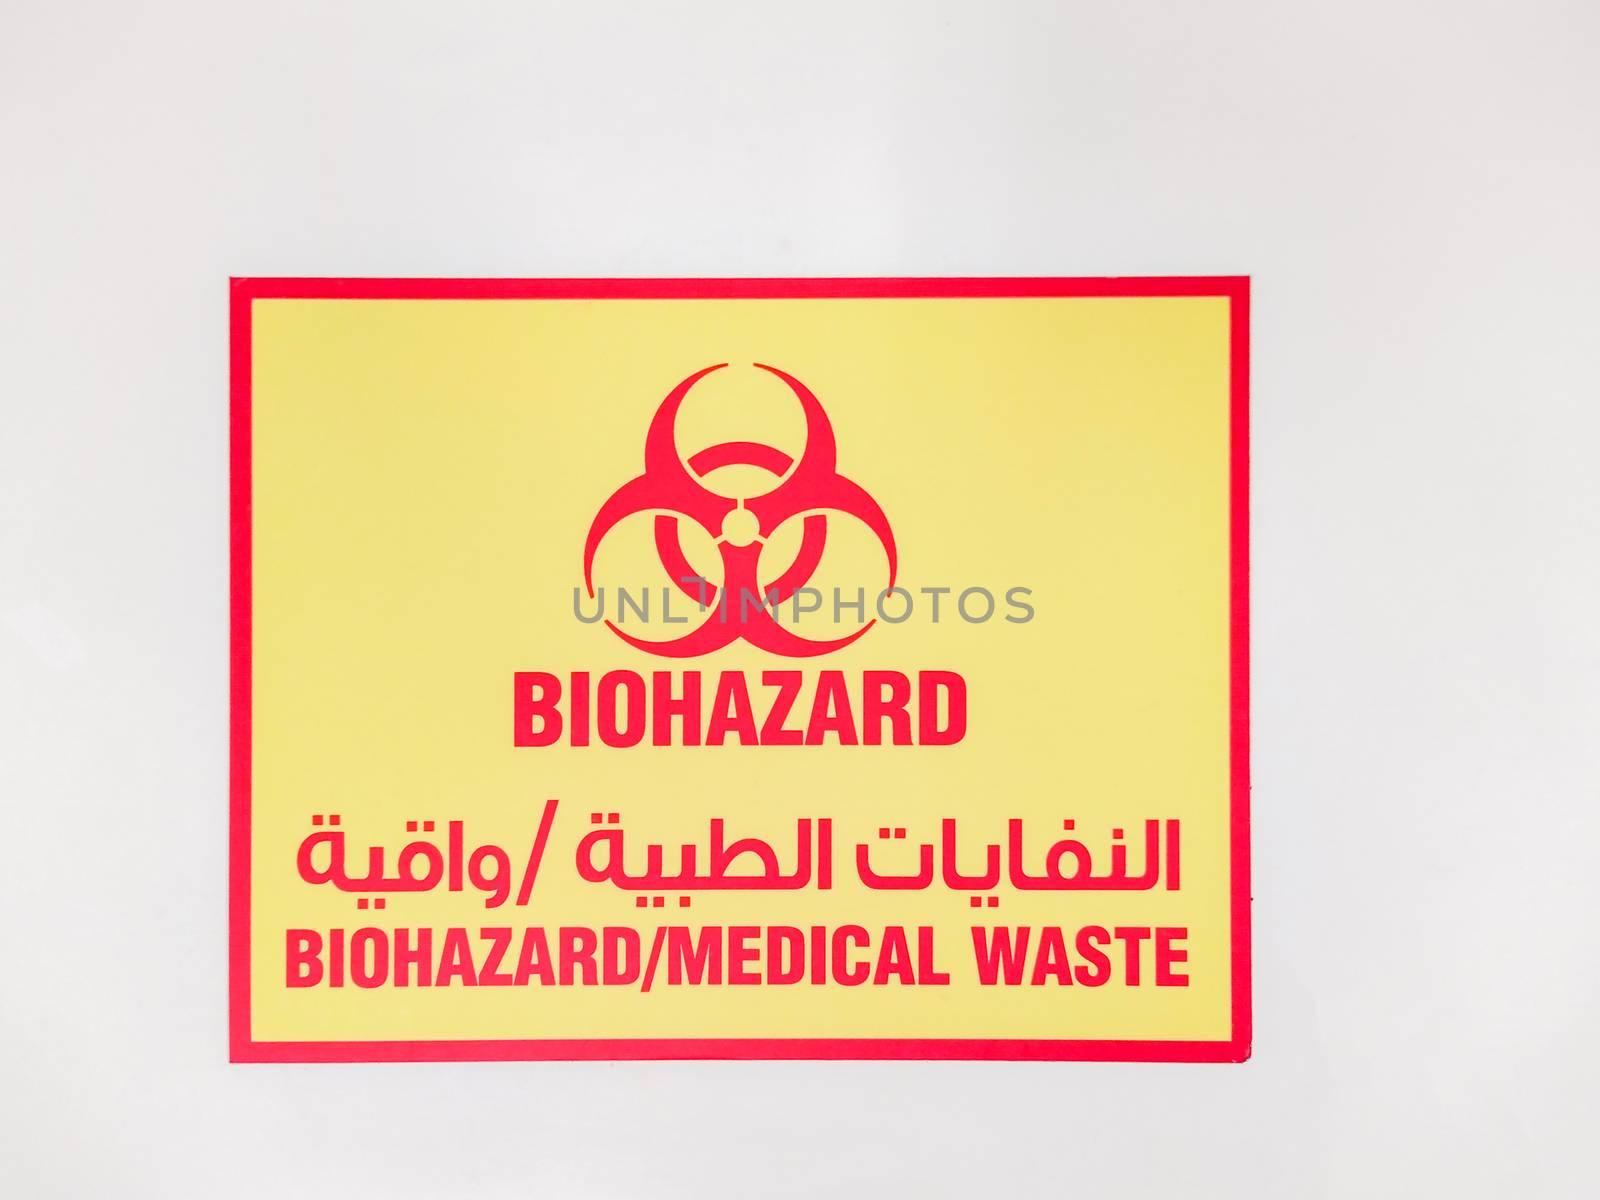 Sign for Biohazard medical waste. Arabic writing can read Biohazard medical waste. Concept of biohazard in middle east and arabic speaking countries by dugulan